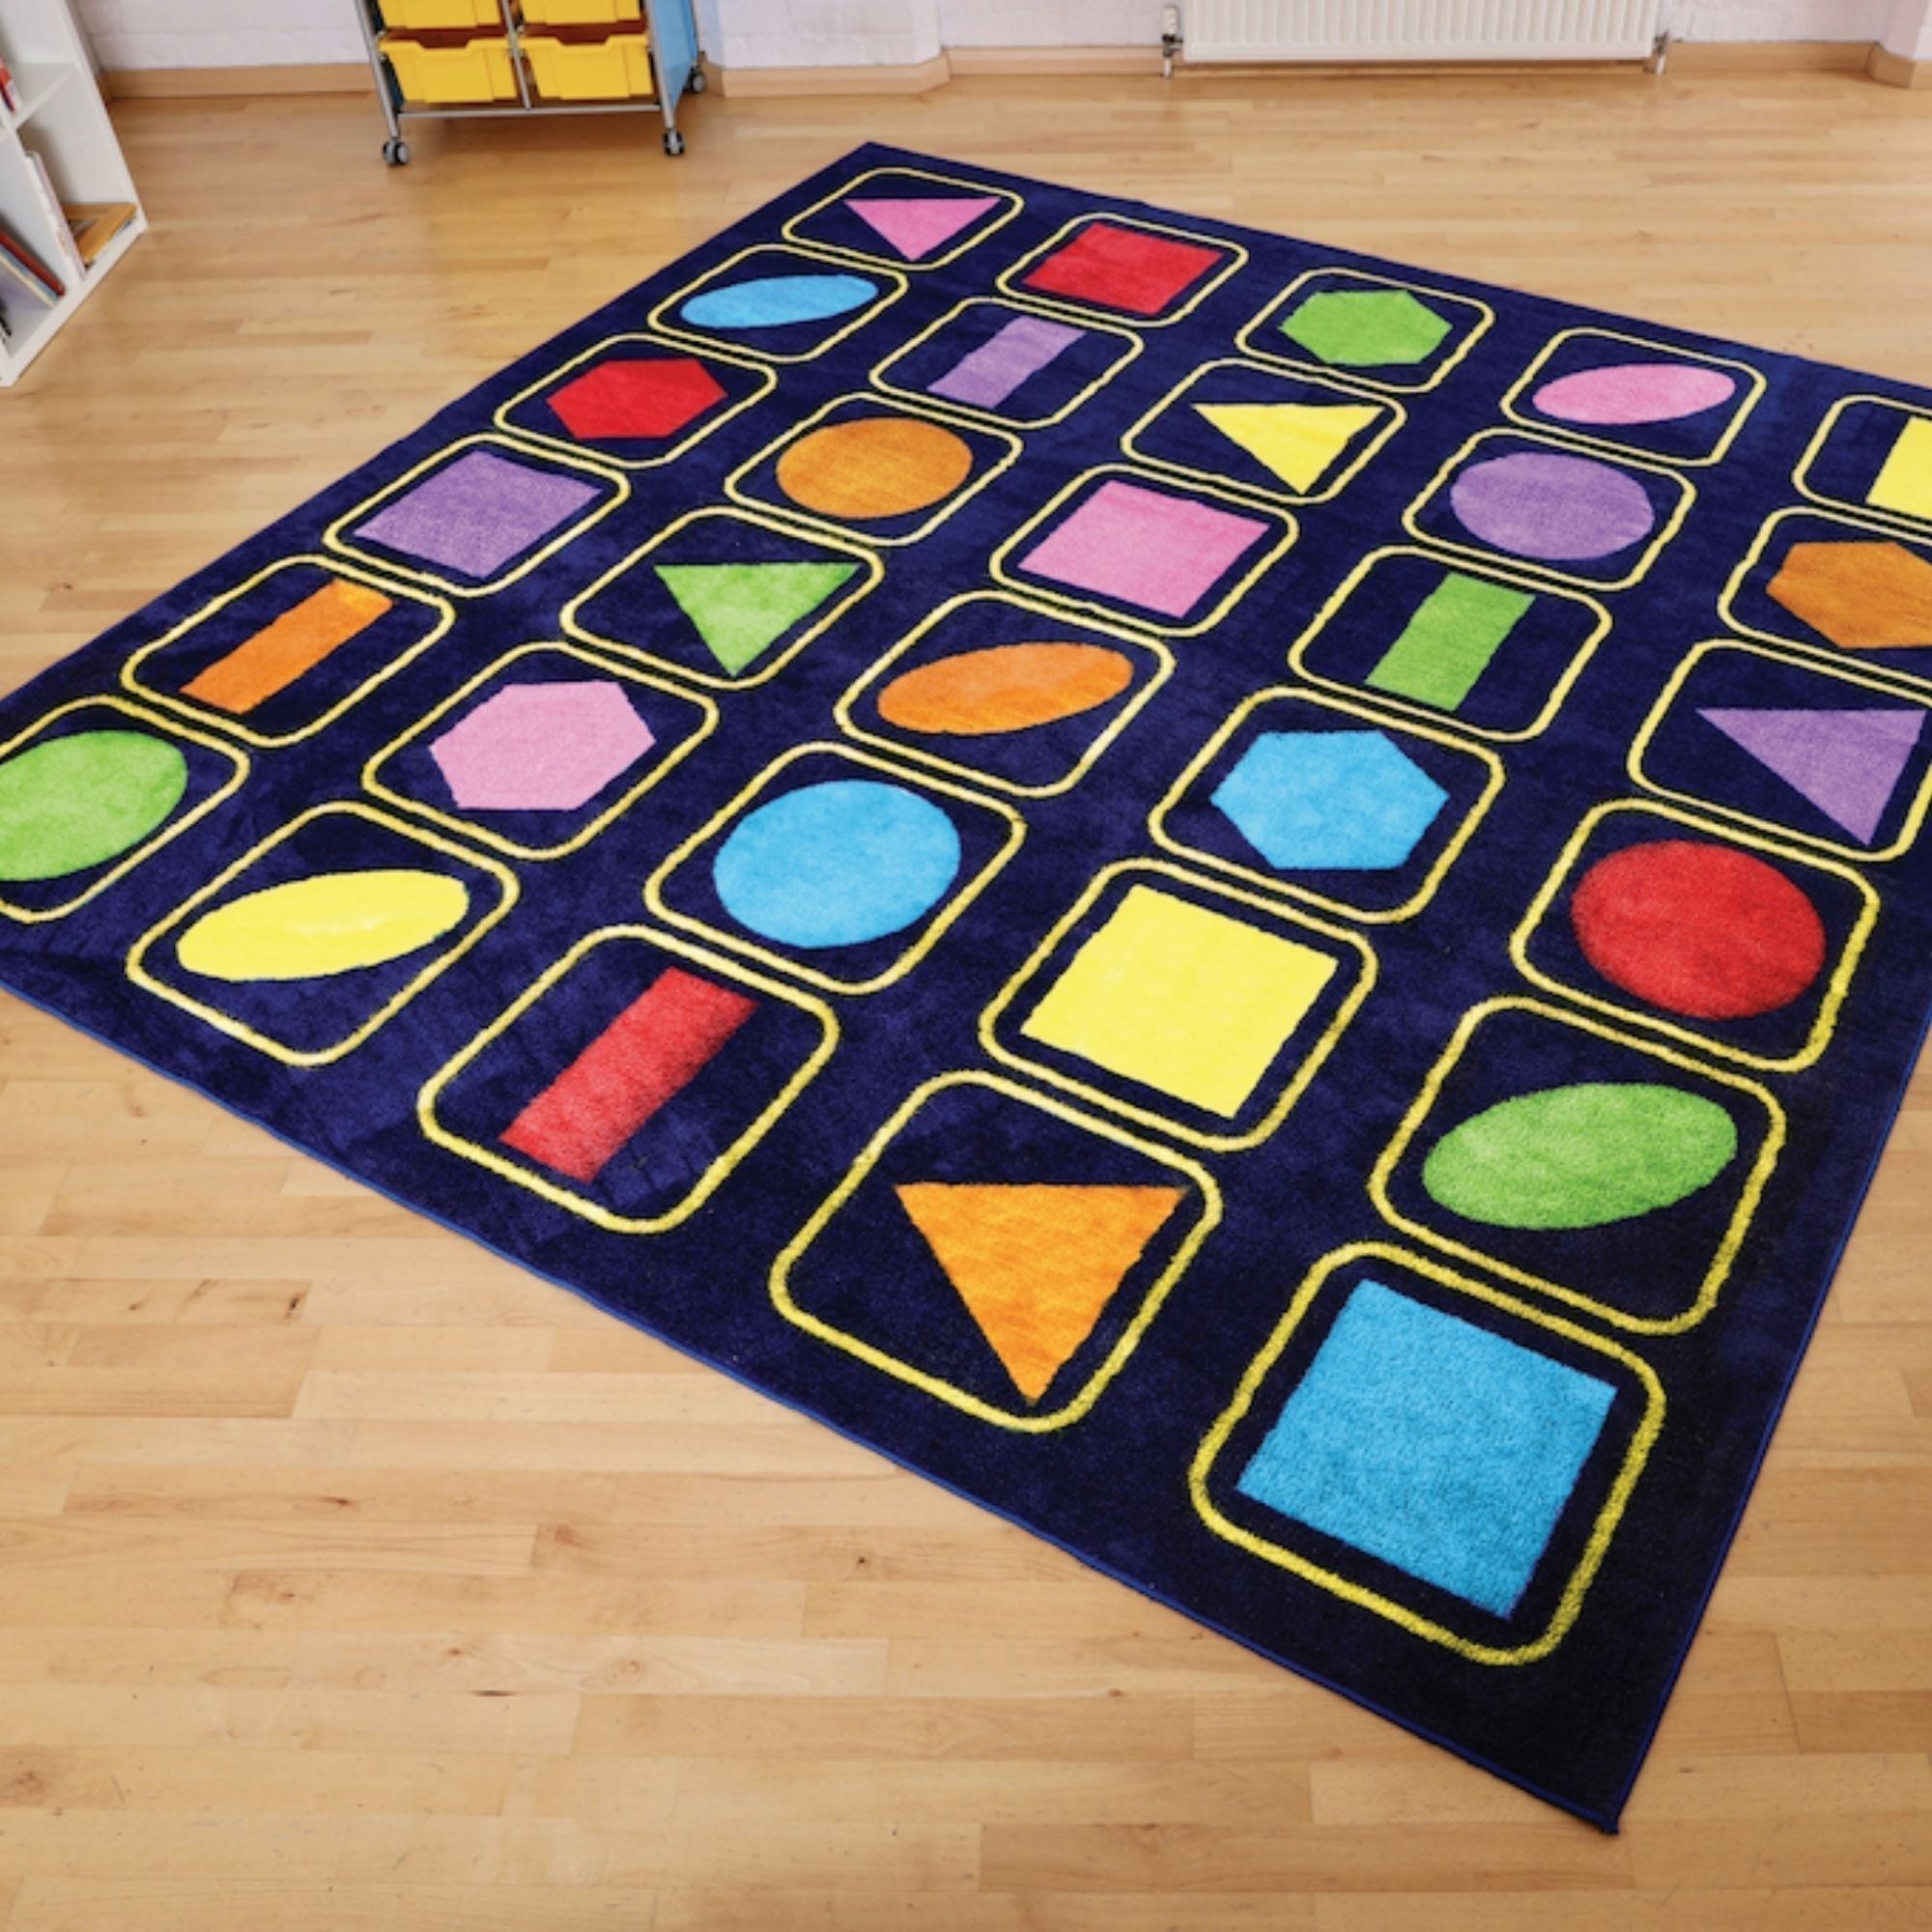 Kindercolour Geometric Shapes Carpet 3 X 3 Metre, The Kindercolour™Geometric Shapes Carpet is a huge 3m square placement carpet with clearly recognisable seating areas for up to 30 children. These brightly coloured basic shapes aid shape and pattern identification. Heavy duty Dura-Pile™, substantial premium quality carpet, with an extra thick pile. Soft textured, tufted Nylon twist pile, designed specifically for comfort and longevity. Ideal for early years and primary school learning environments. Tightly 